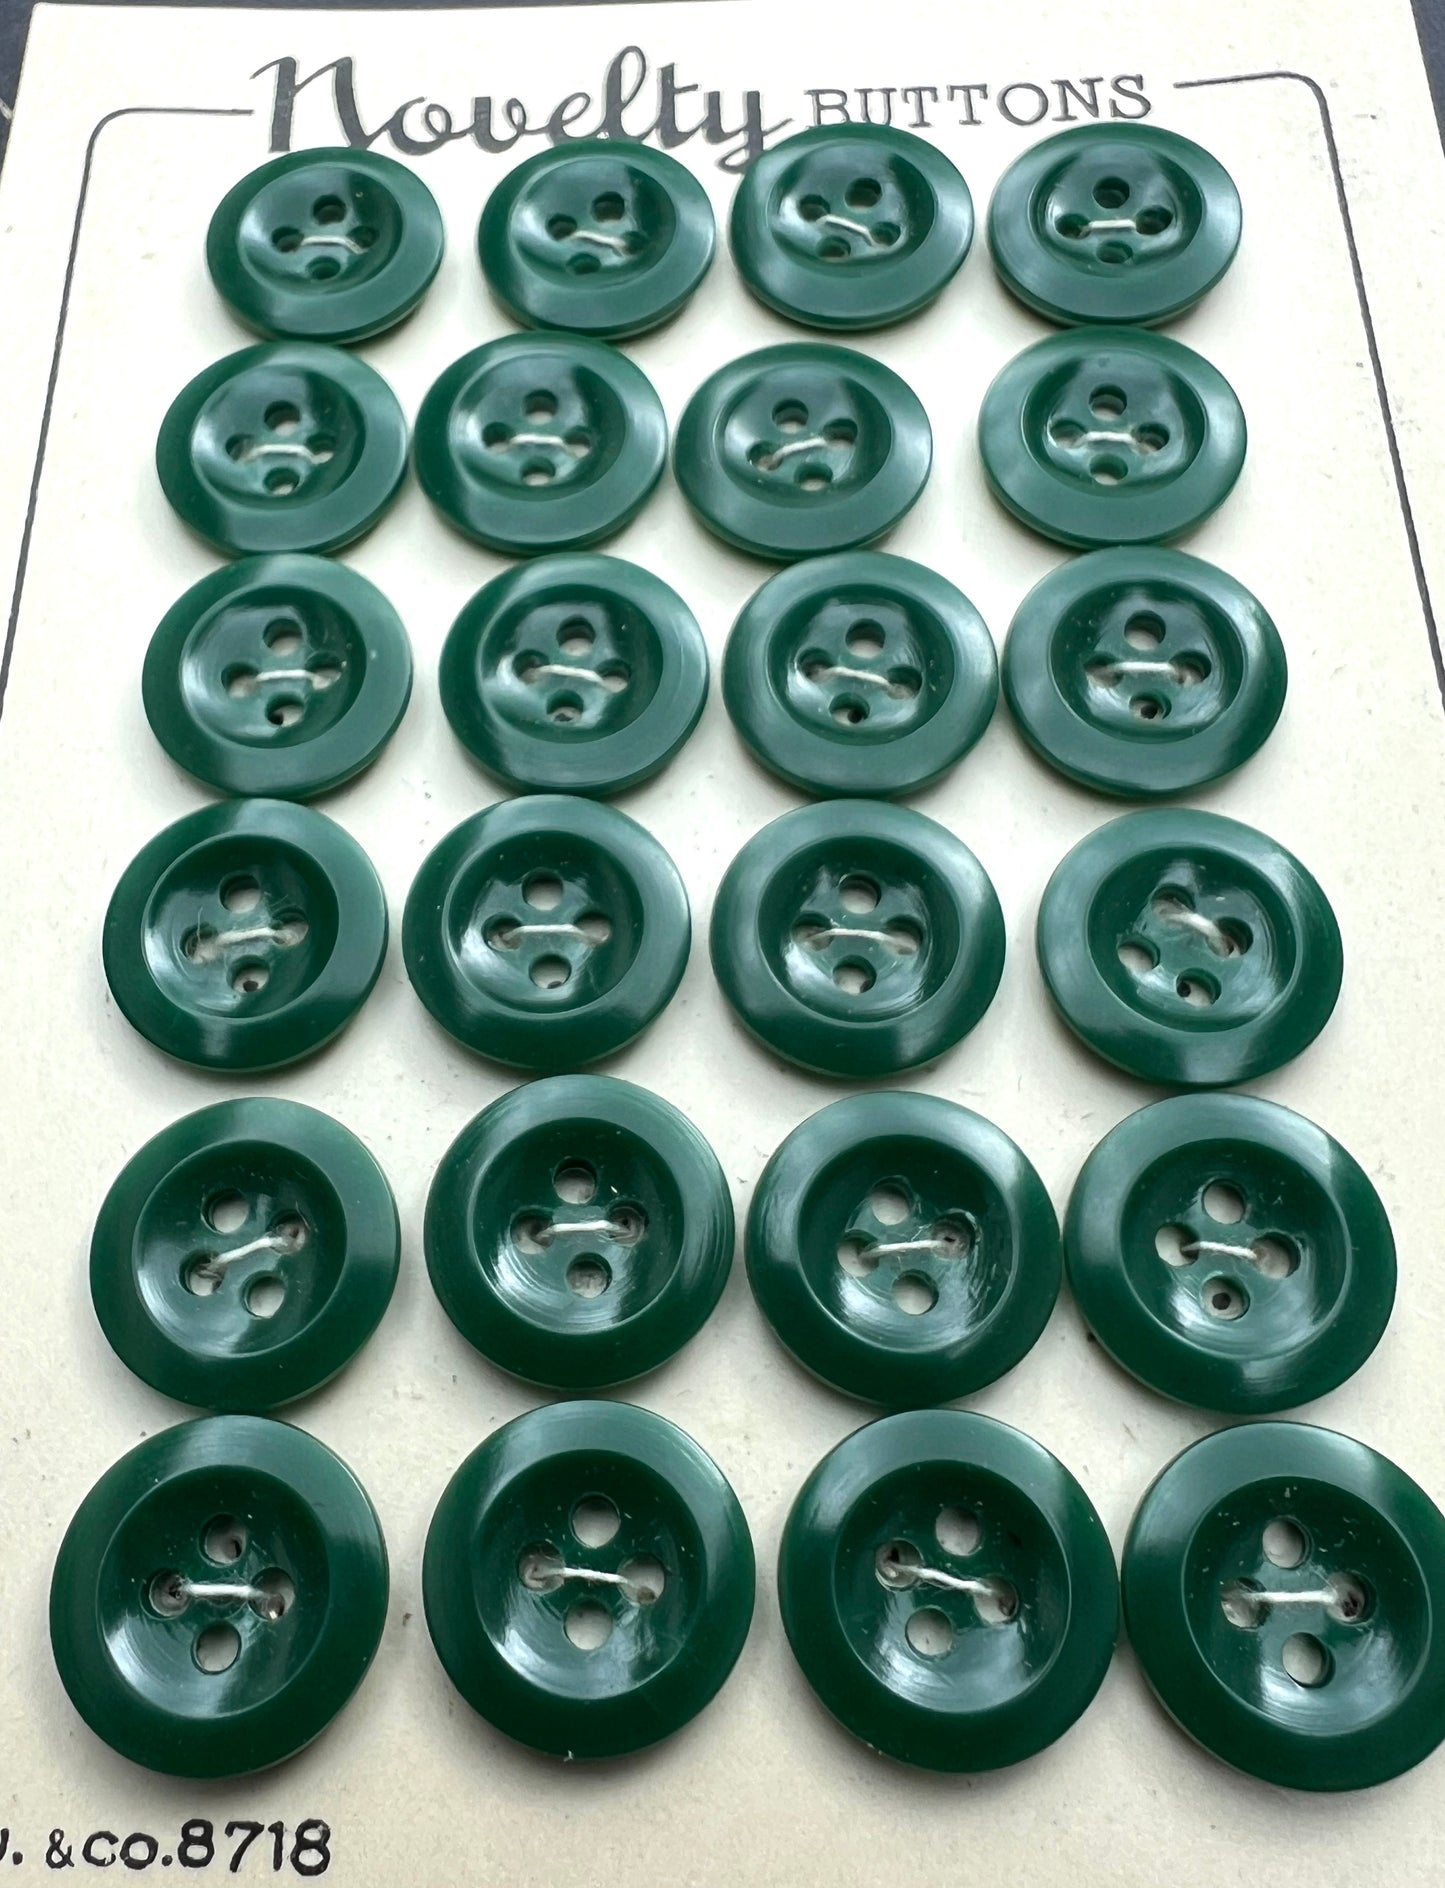 1940s Racing Green Buttons - 24 x 1cm or 1.3cm